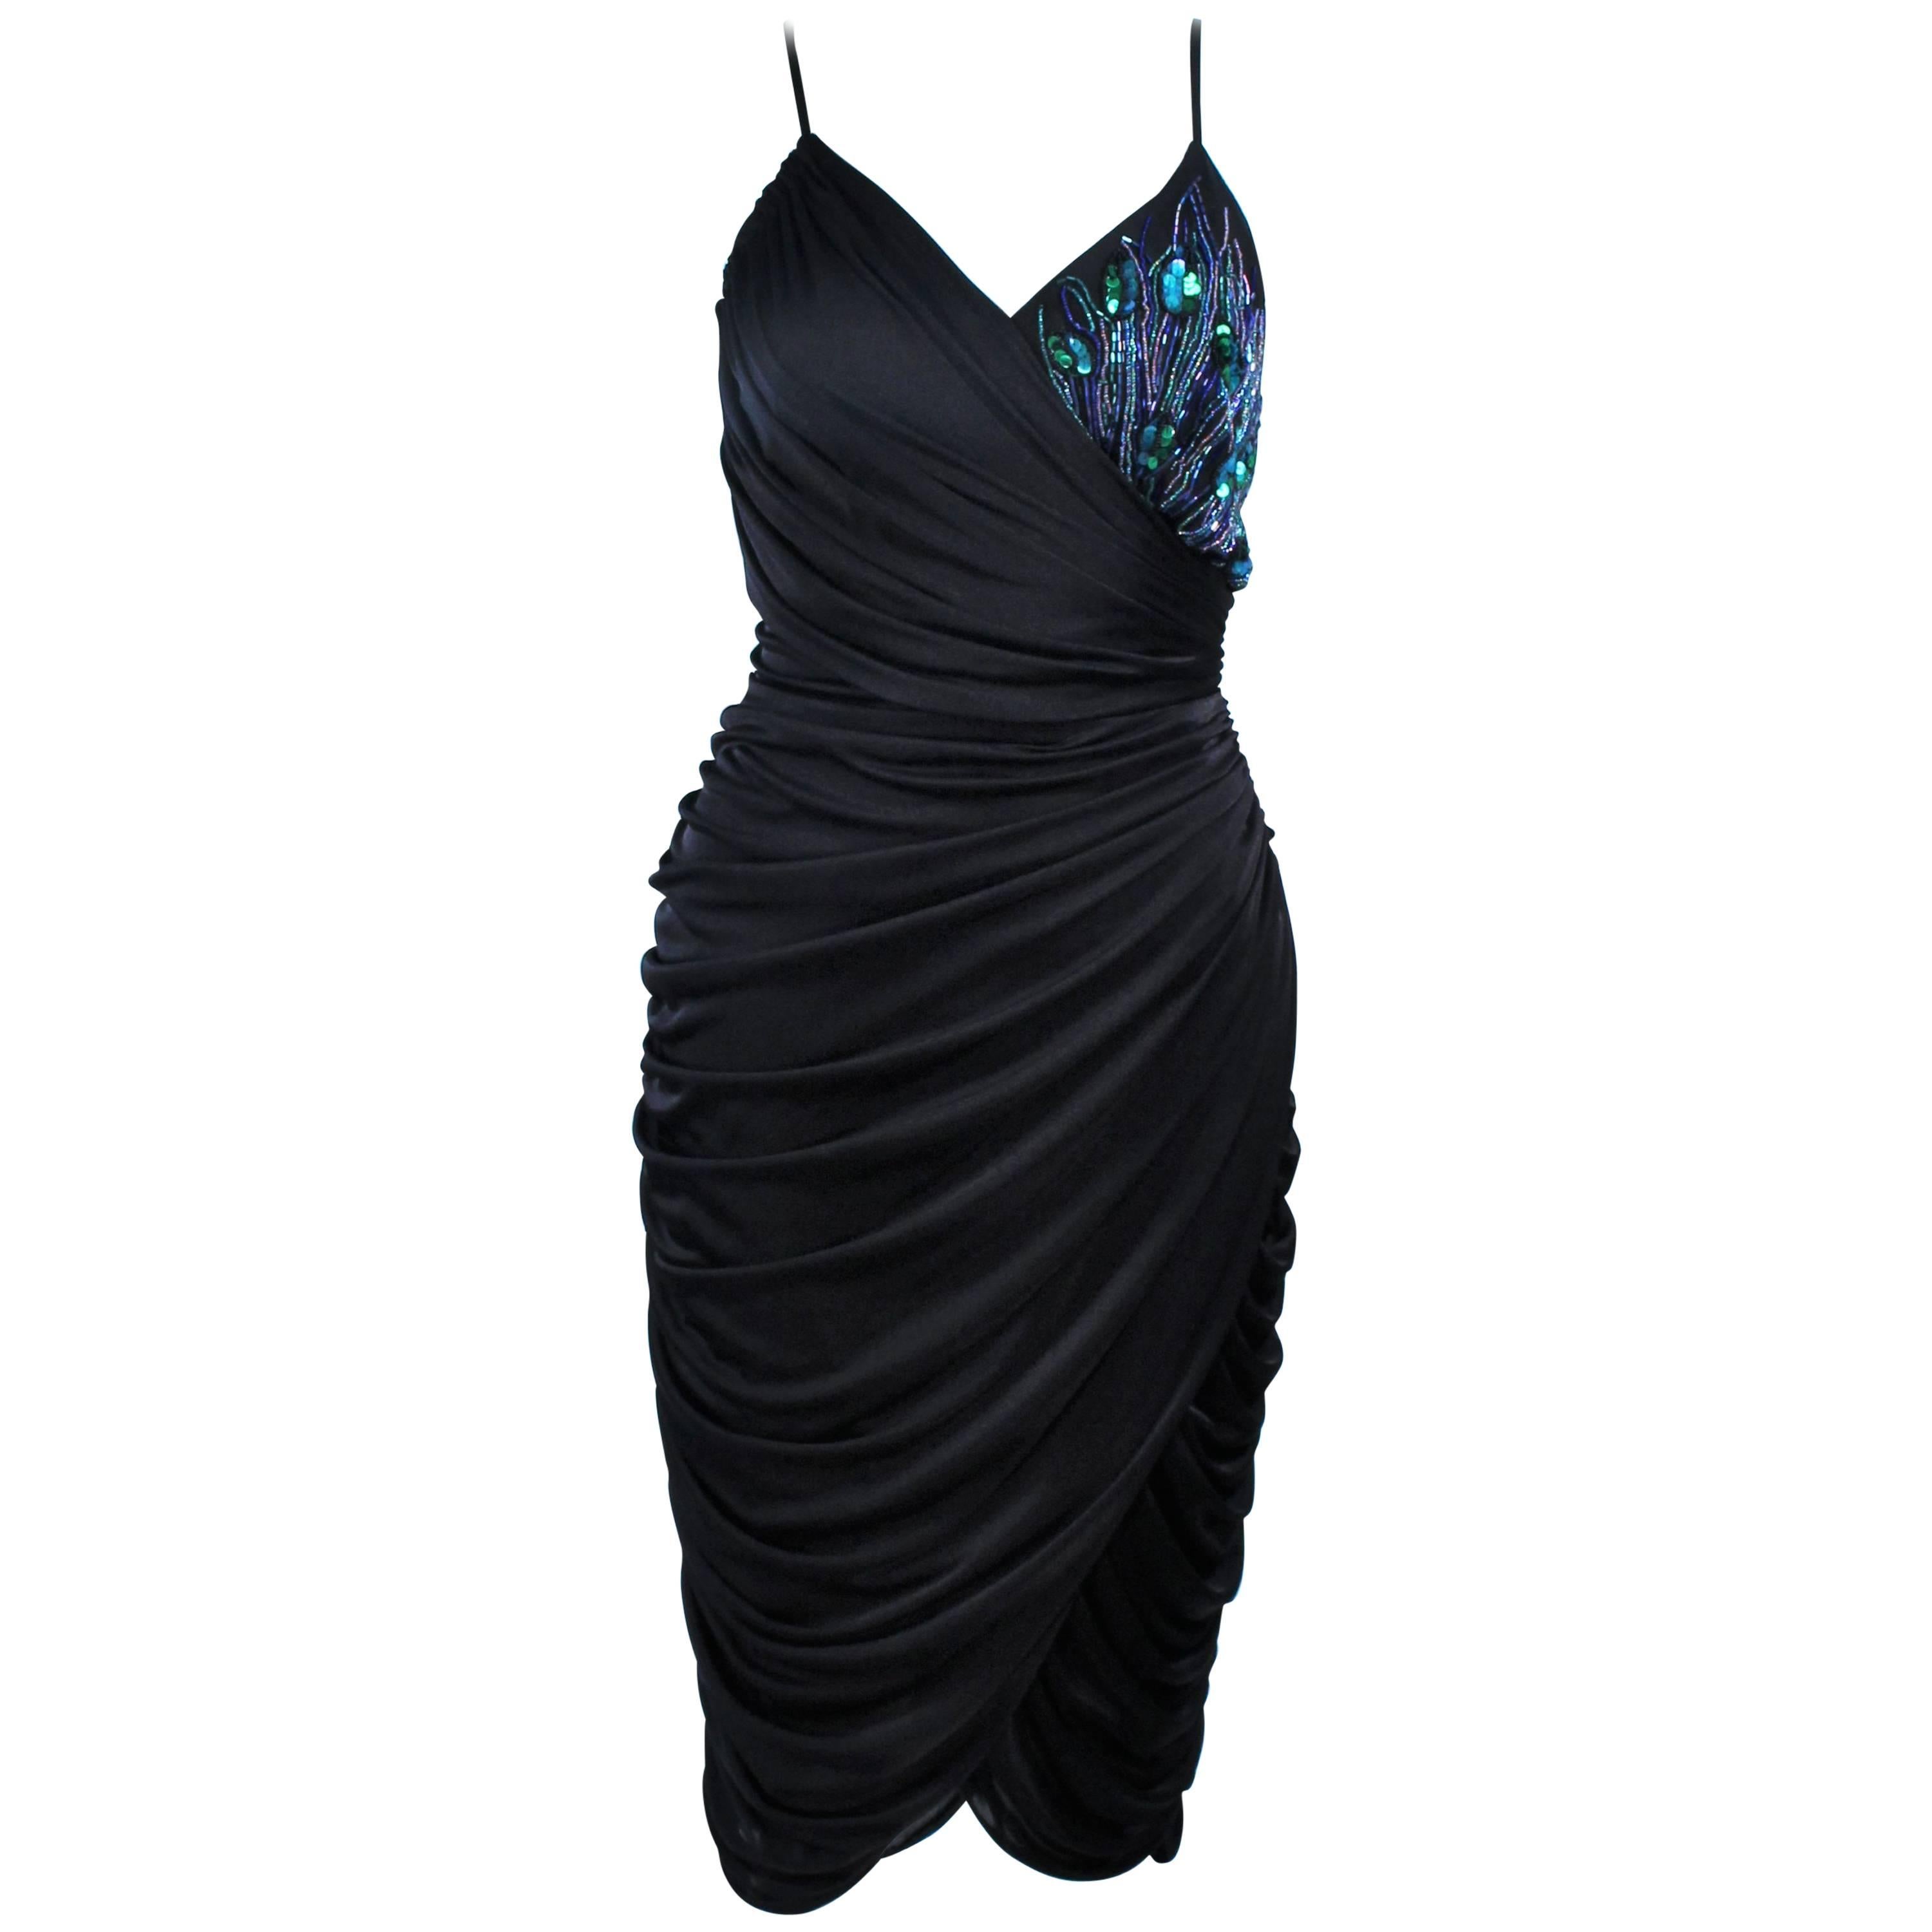 ABBEY KENT Black Draped Jersey Cocktail Dress with Iridescent Sequin Applique 10 For Sale